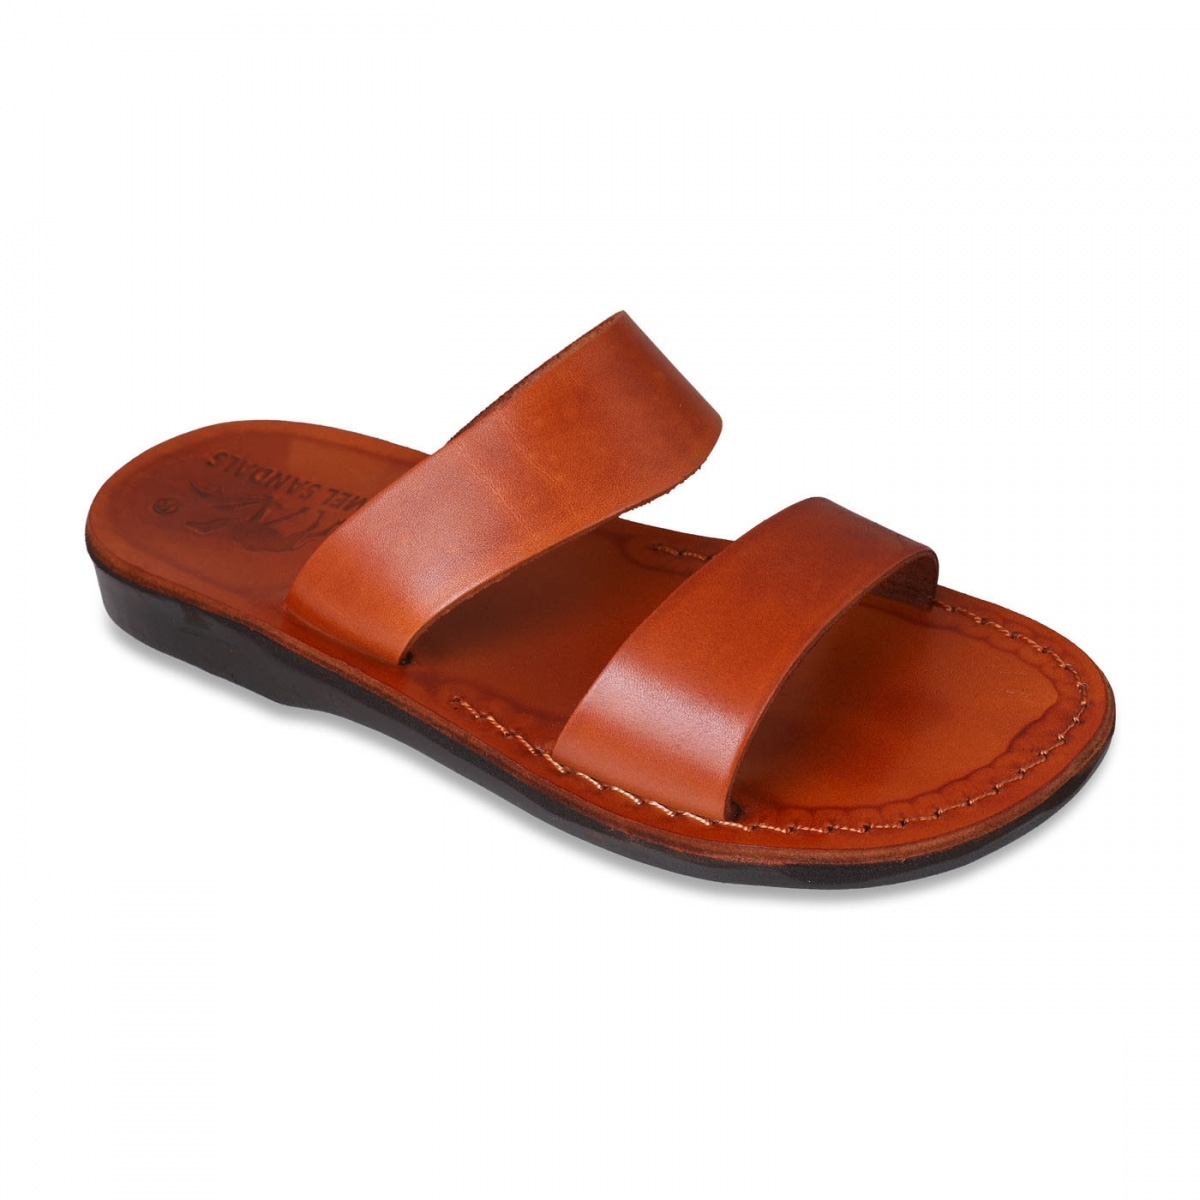 King David Handmade Leather Sandals - Choice of Colors - 1